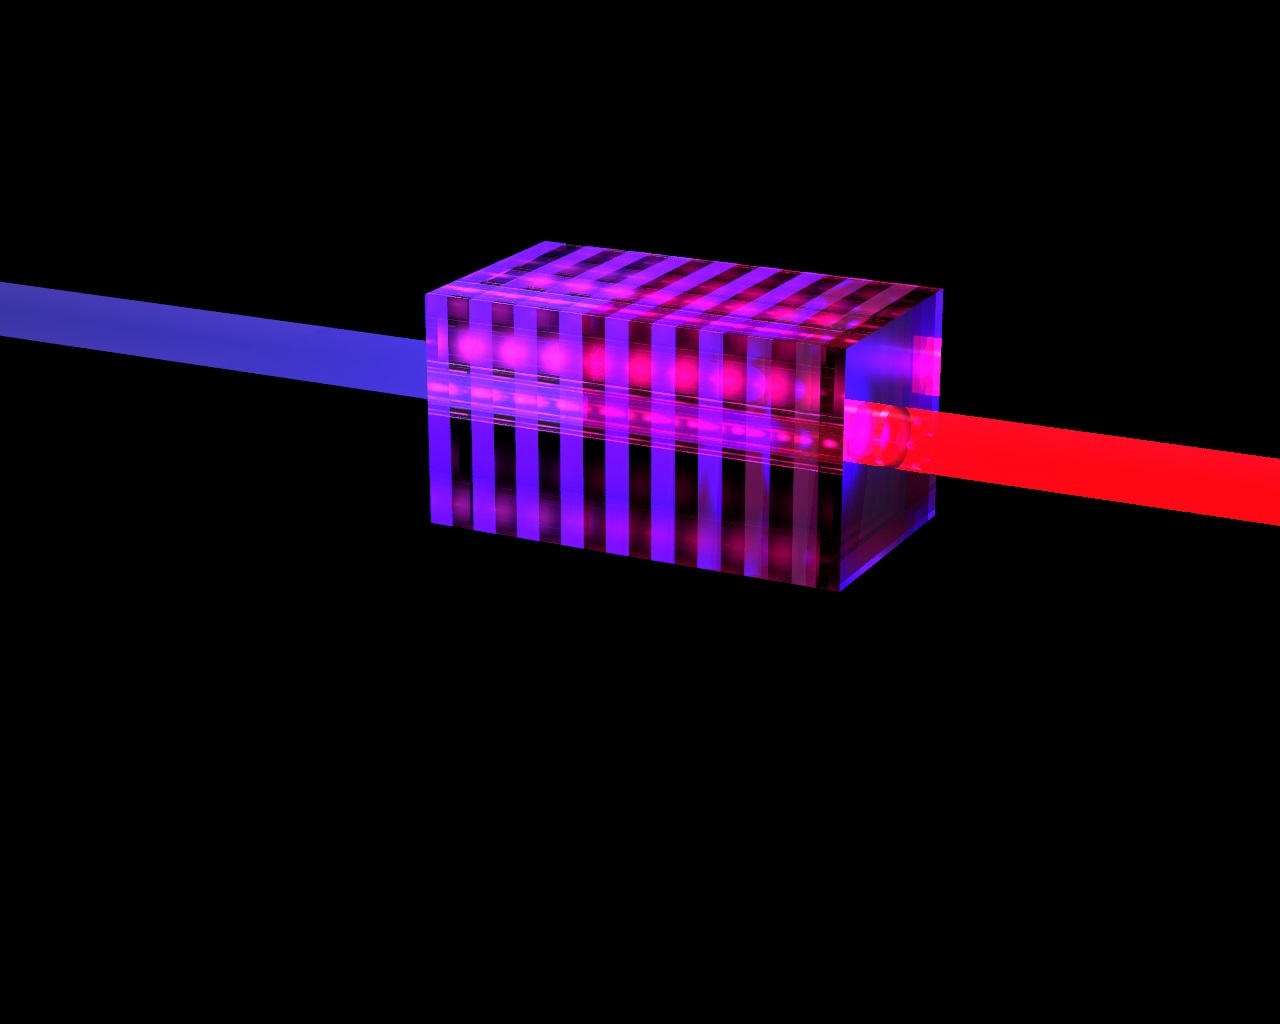 Manipulating the crystal structure of the light source for getting better photons out of it.